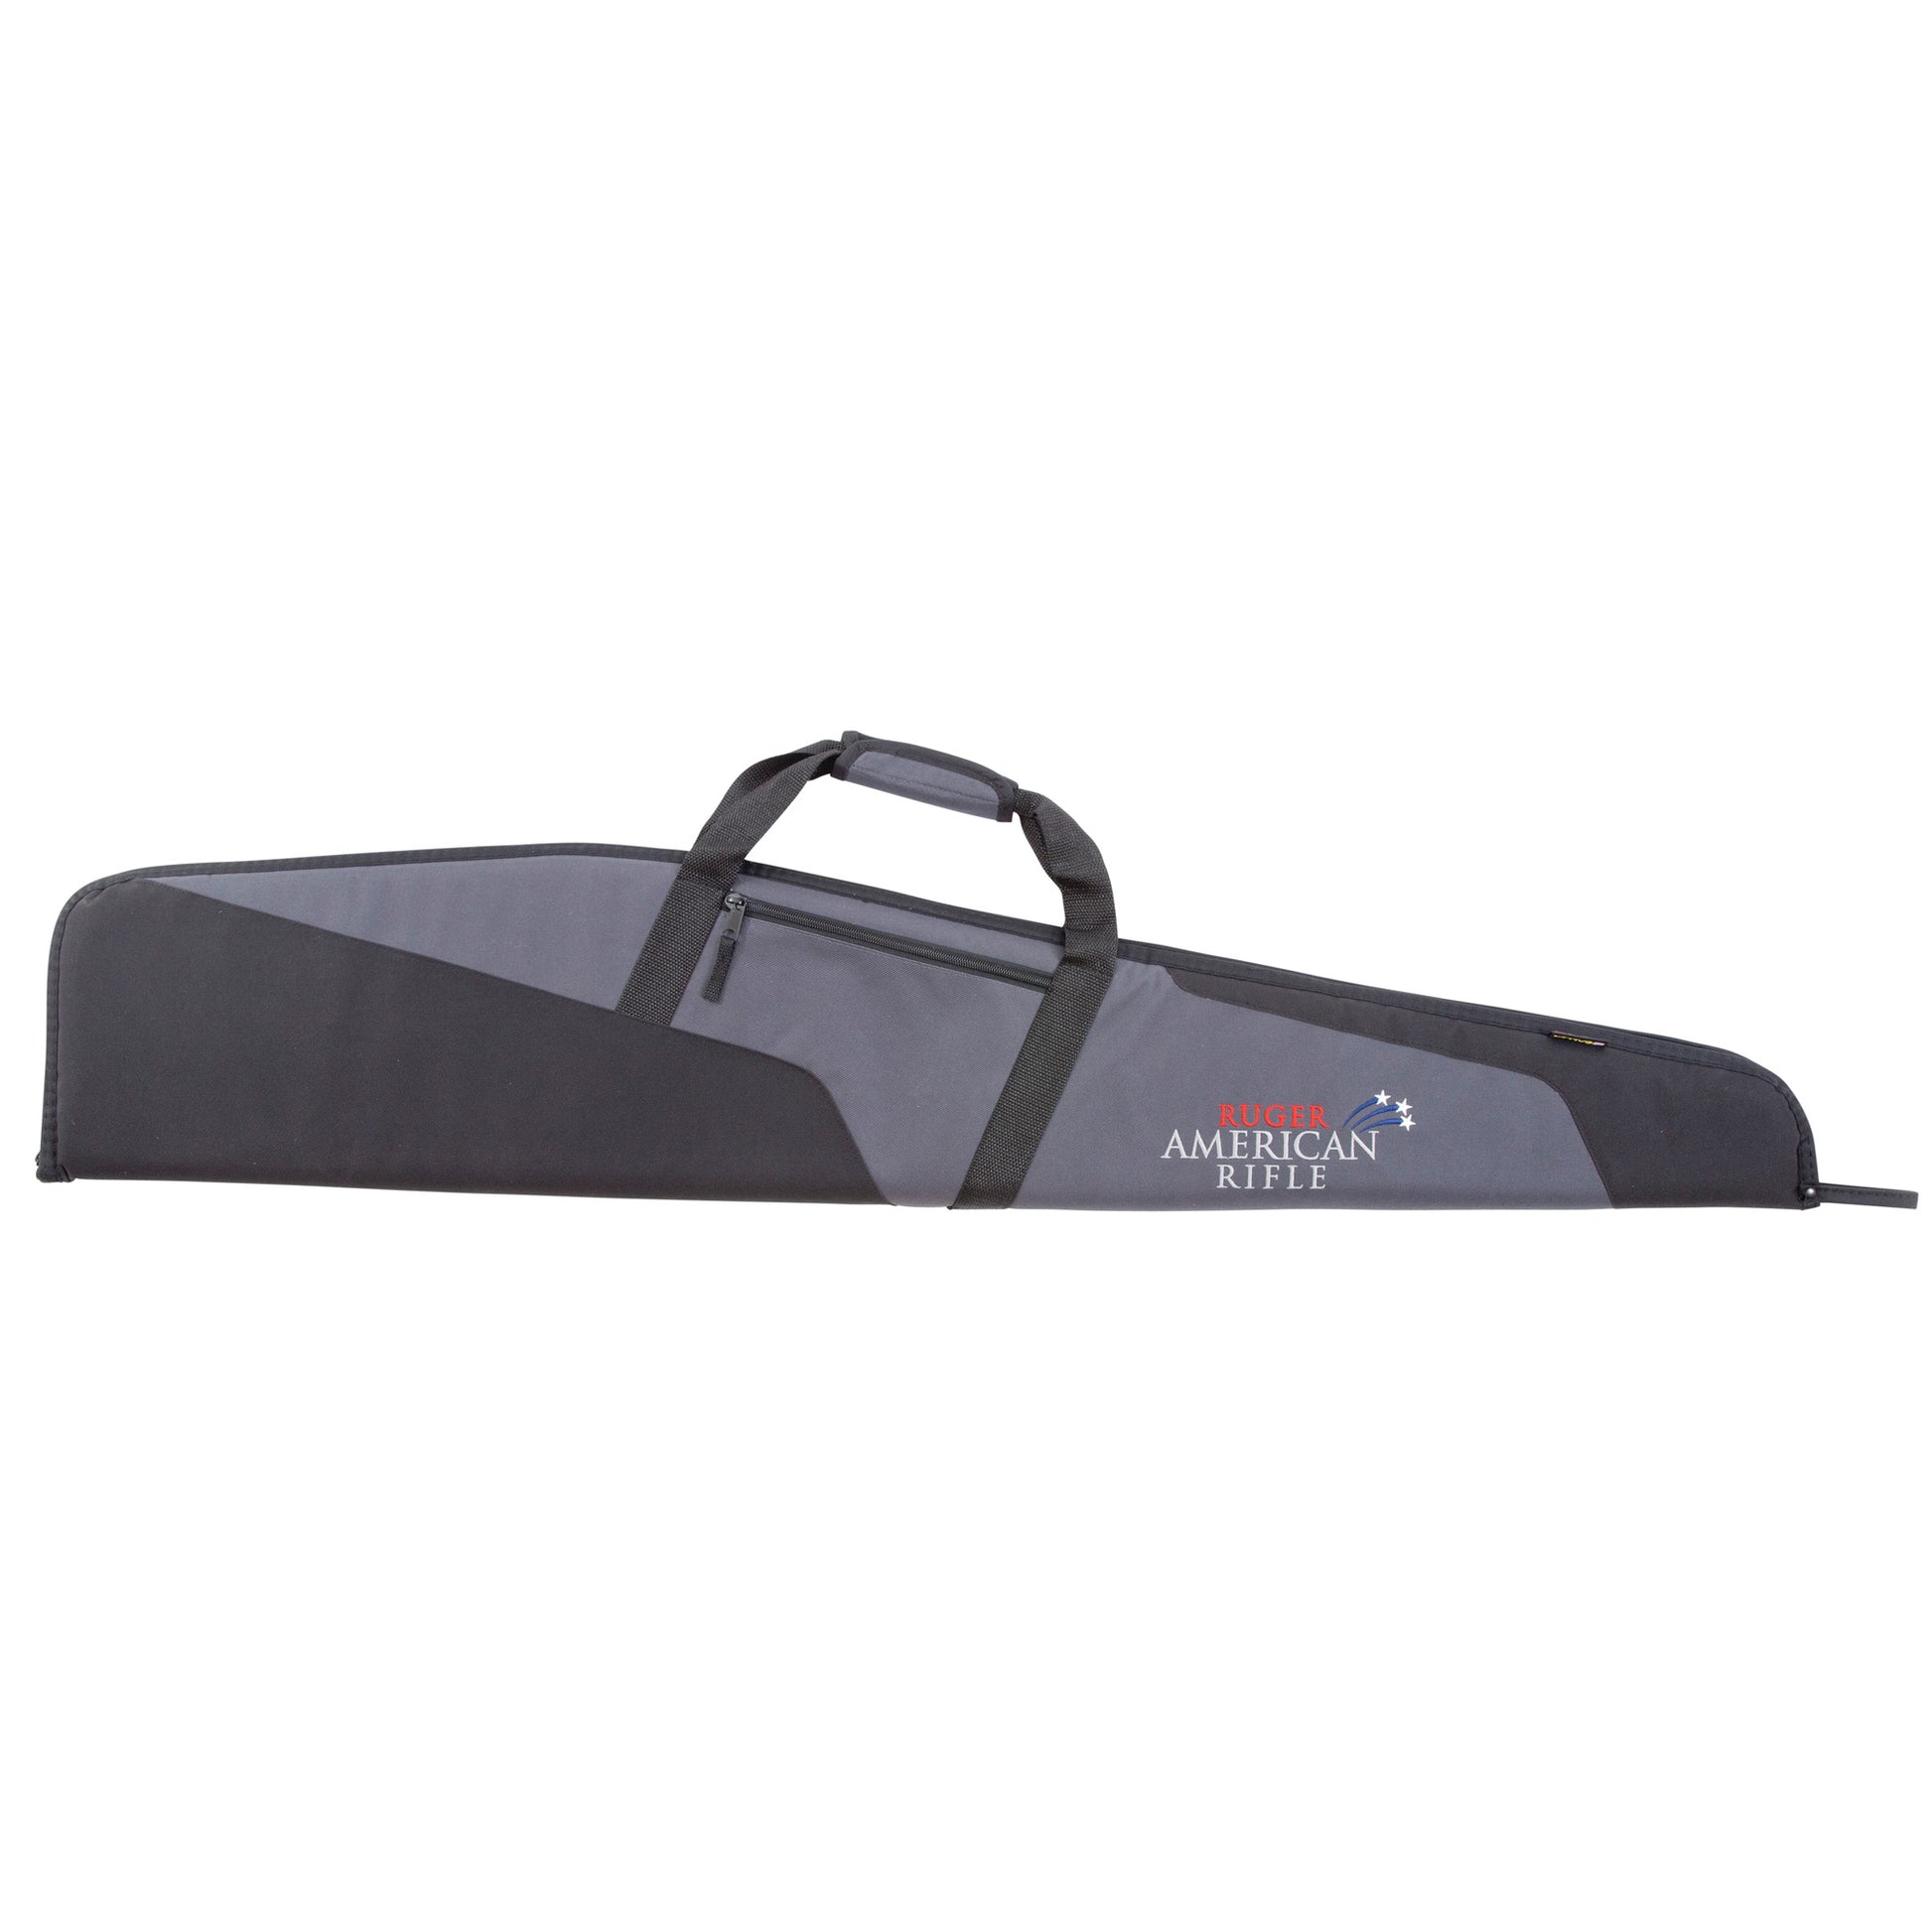 Allen Ruger American Rifle Case Gray/Black 46" Thick Foam Padding Lockable 27433 - California Shooting Supplies